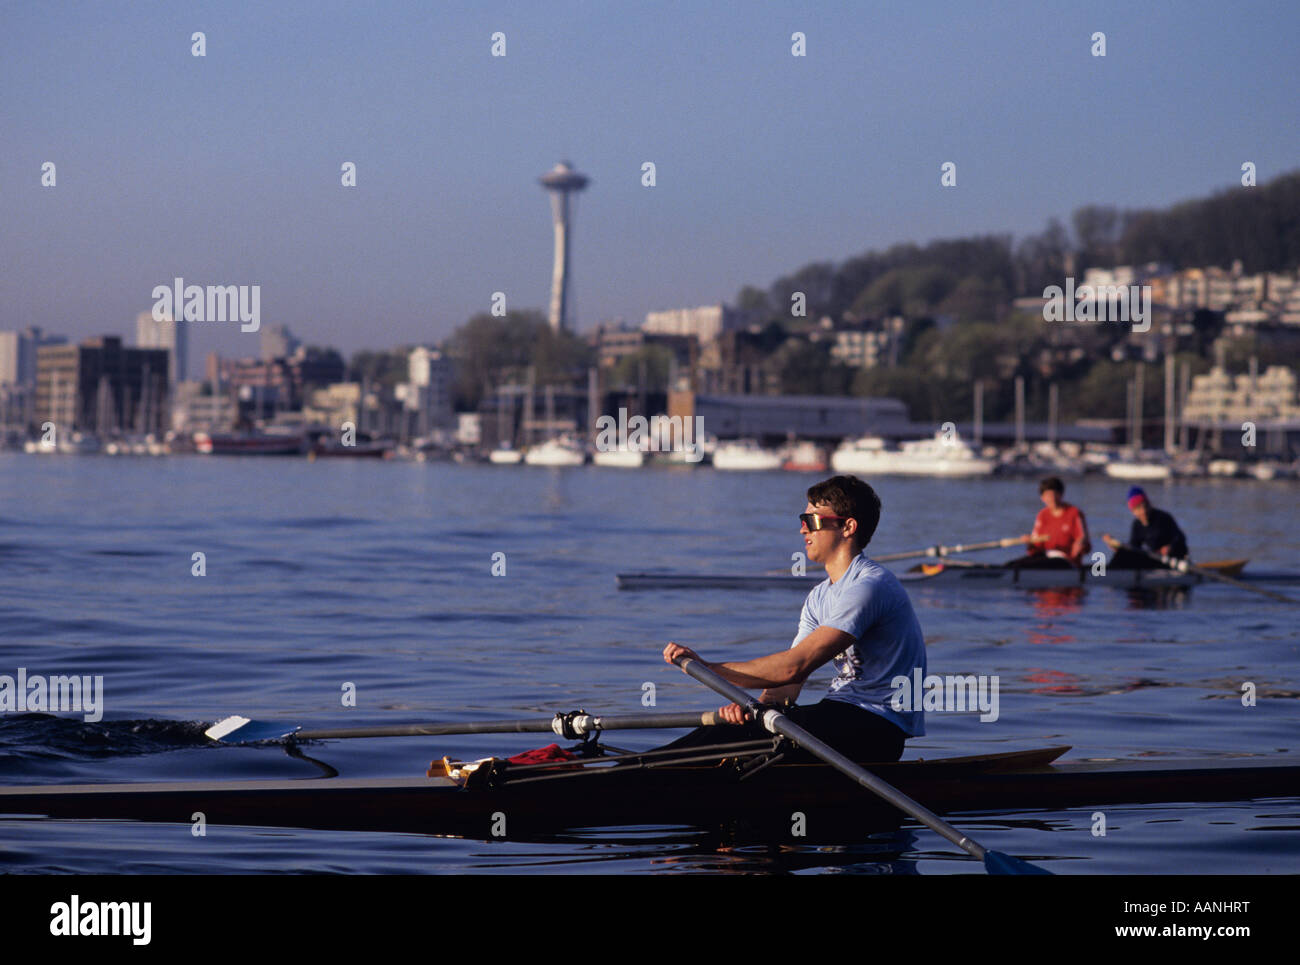 Lake Union with rowers practicing with Space needle in background, summer day Seattle, Washington State, USA Stock Photo